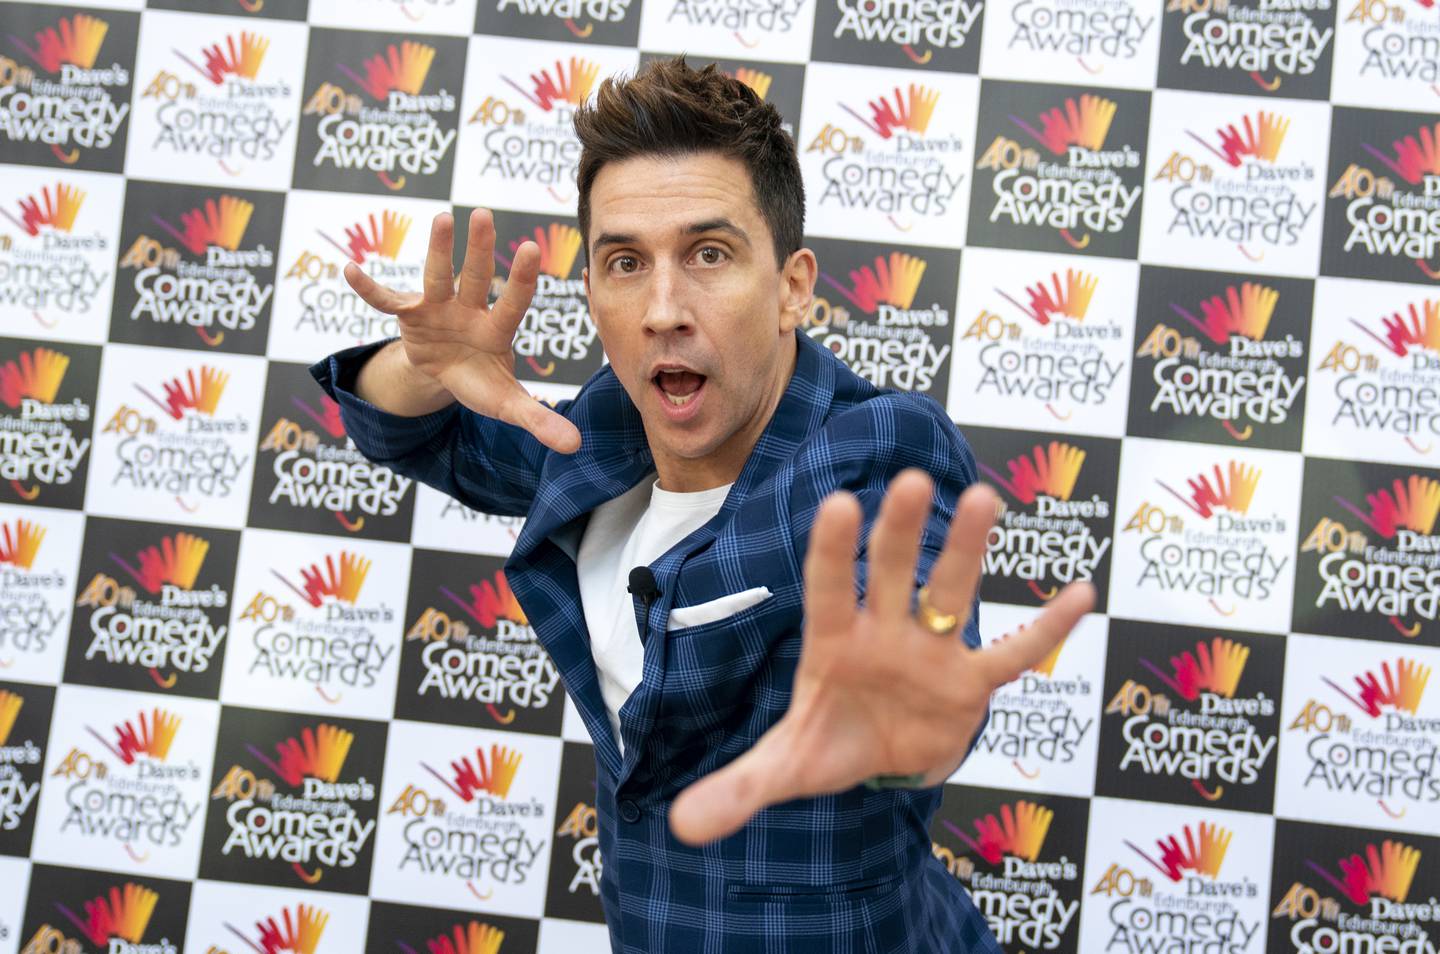 Comedian Russell Kane at the Dave's Edinburgh Comedy Awards at the Edinburgh Festival Fringe. PA Wire